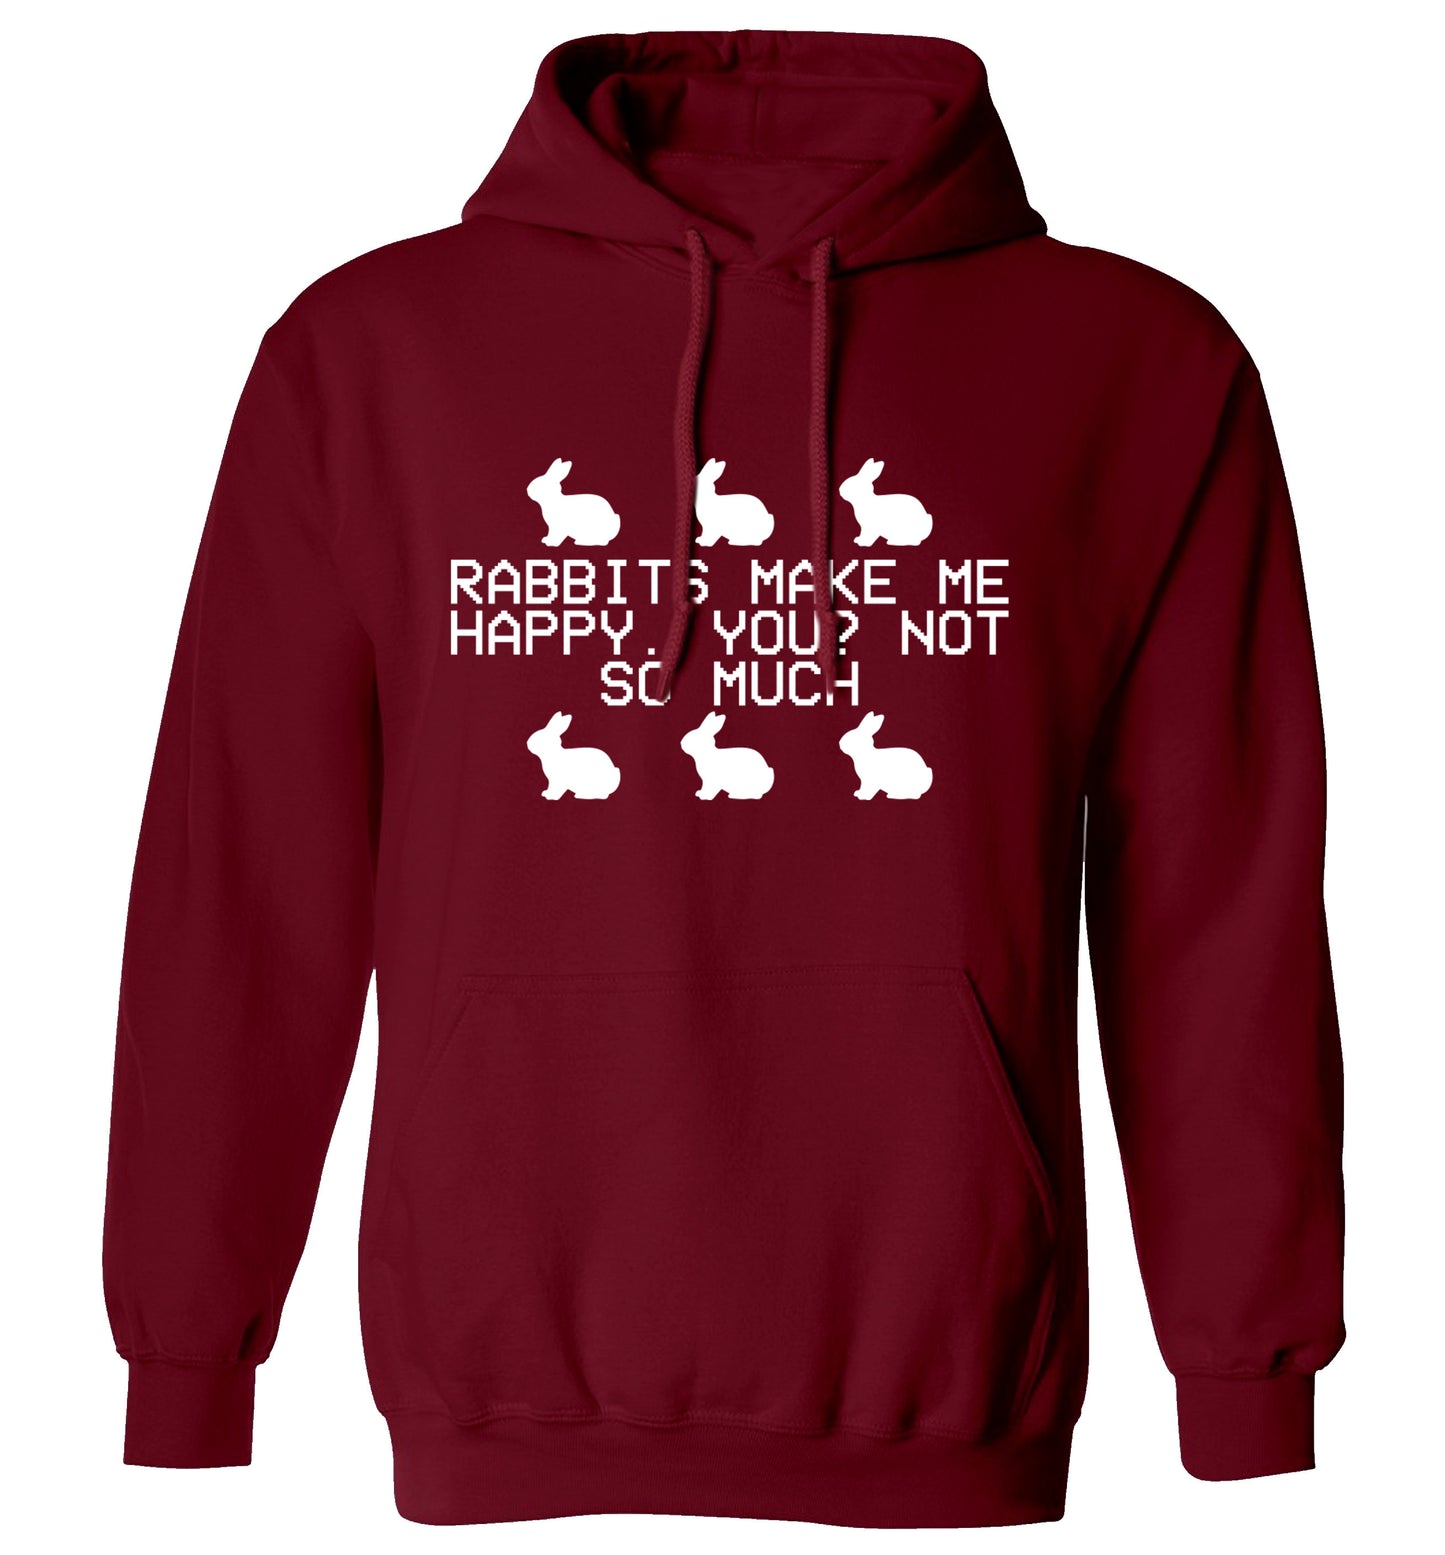 Rabbits make me happy, you not so much adults unisex maroon hoodie 2XL